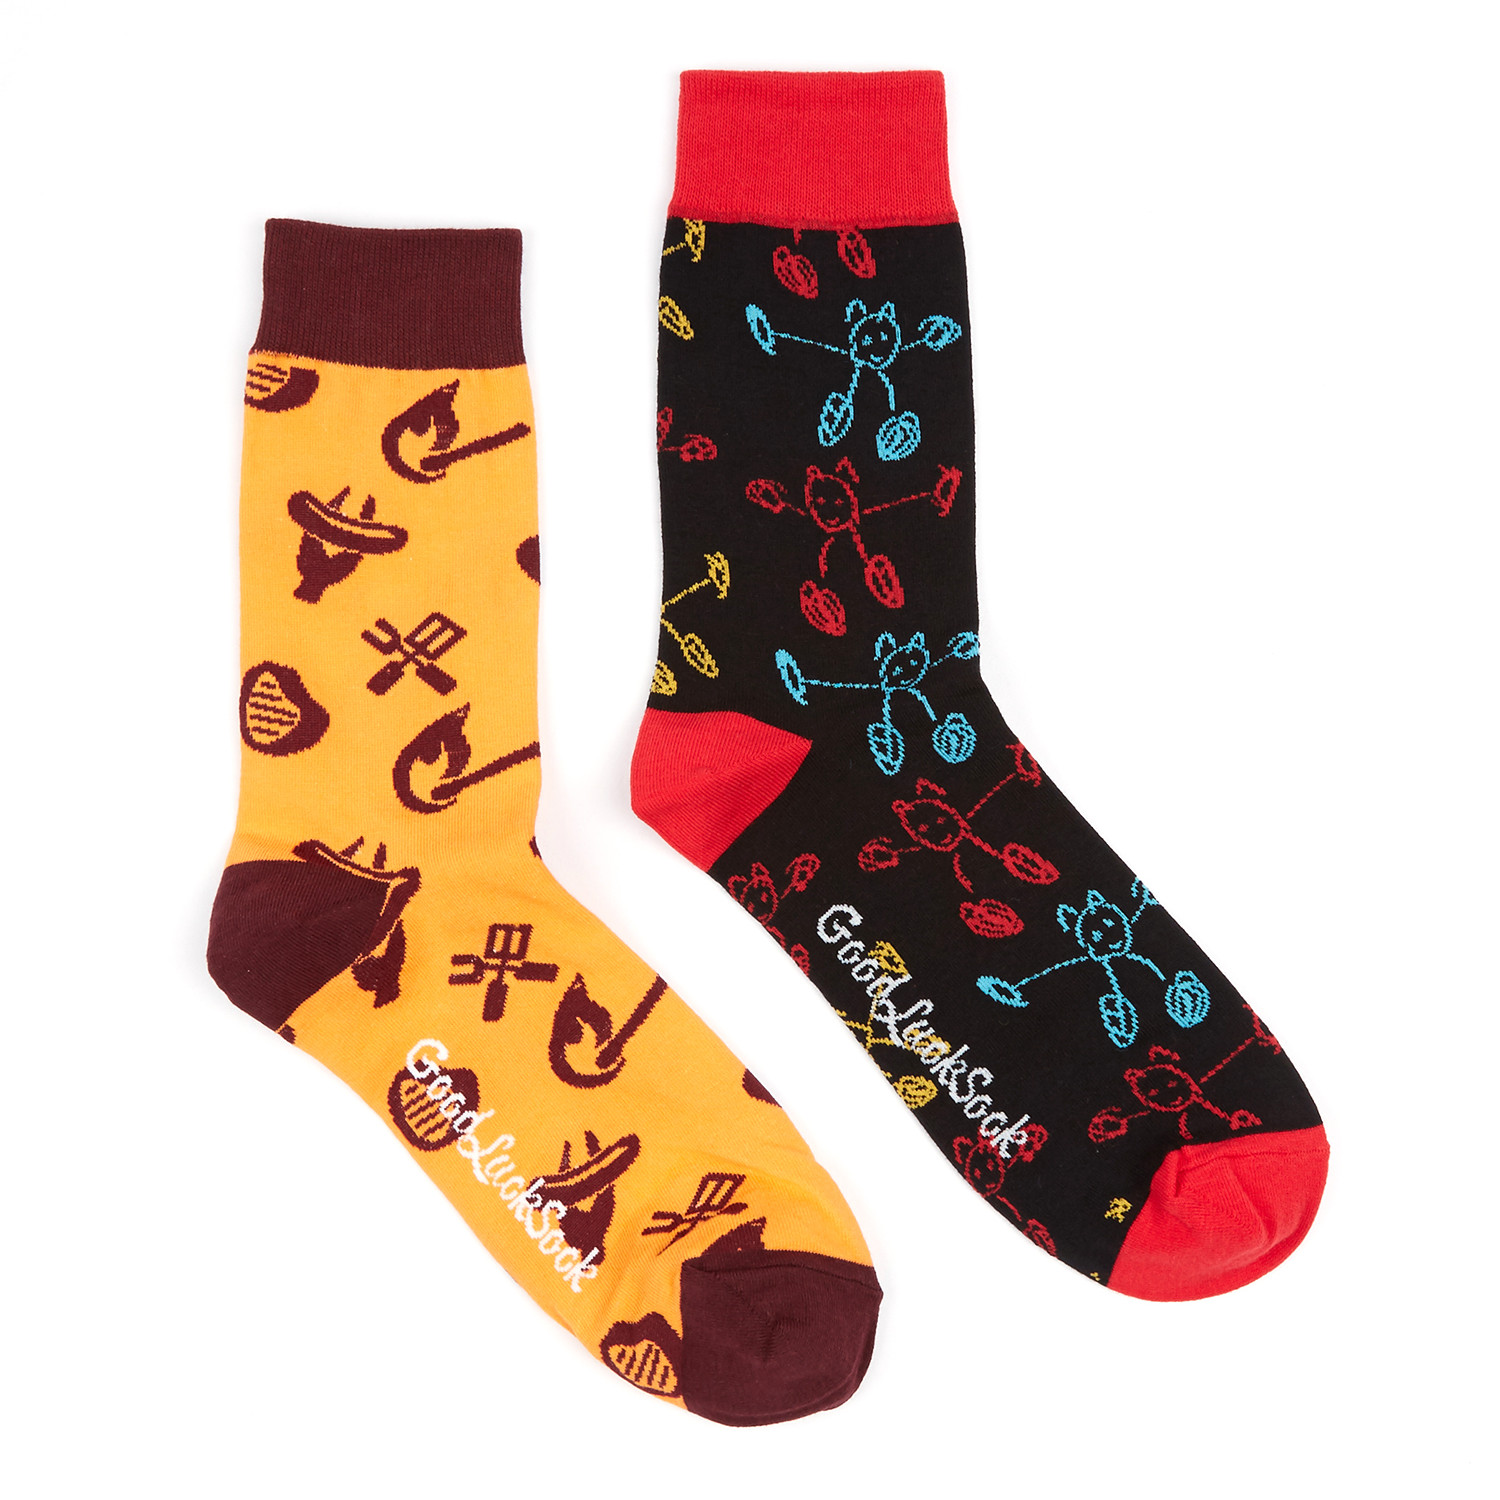 Sketchy Barbecue Socks // Pack of 2 - Good Luck Sock - Touch of Modern